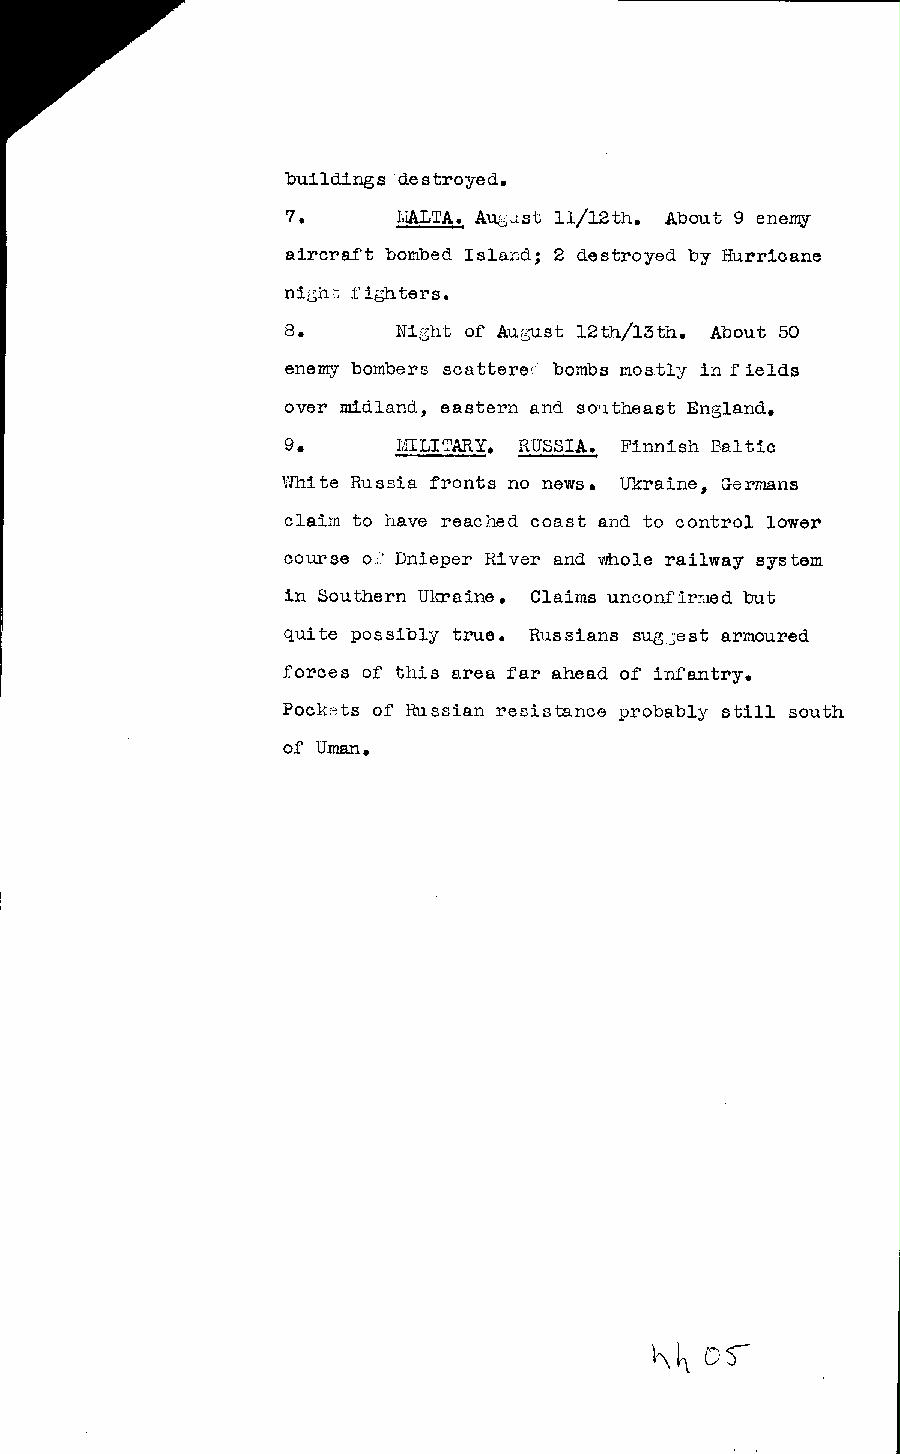 [a322hh05.jpg] - Cont-Report on military situation 8/13/41